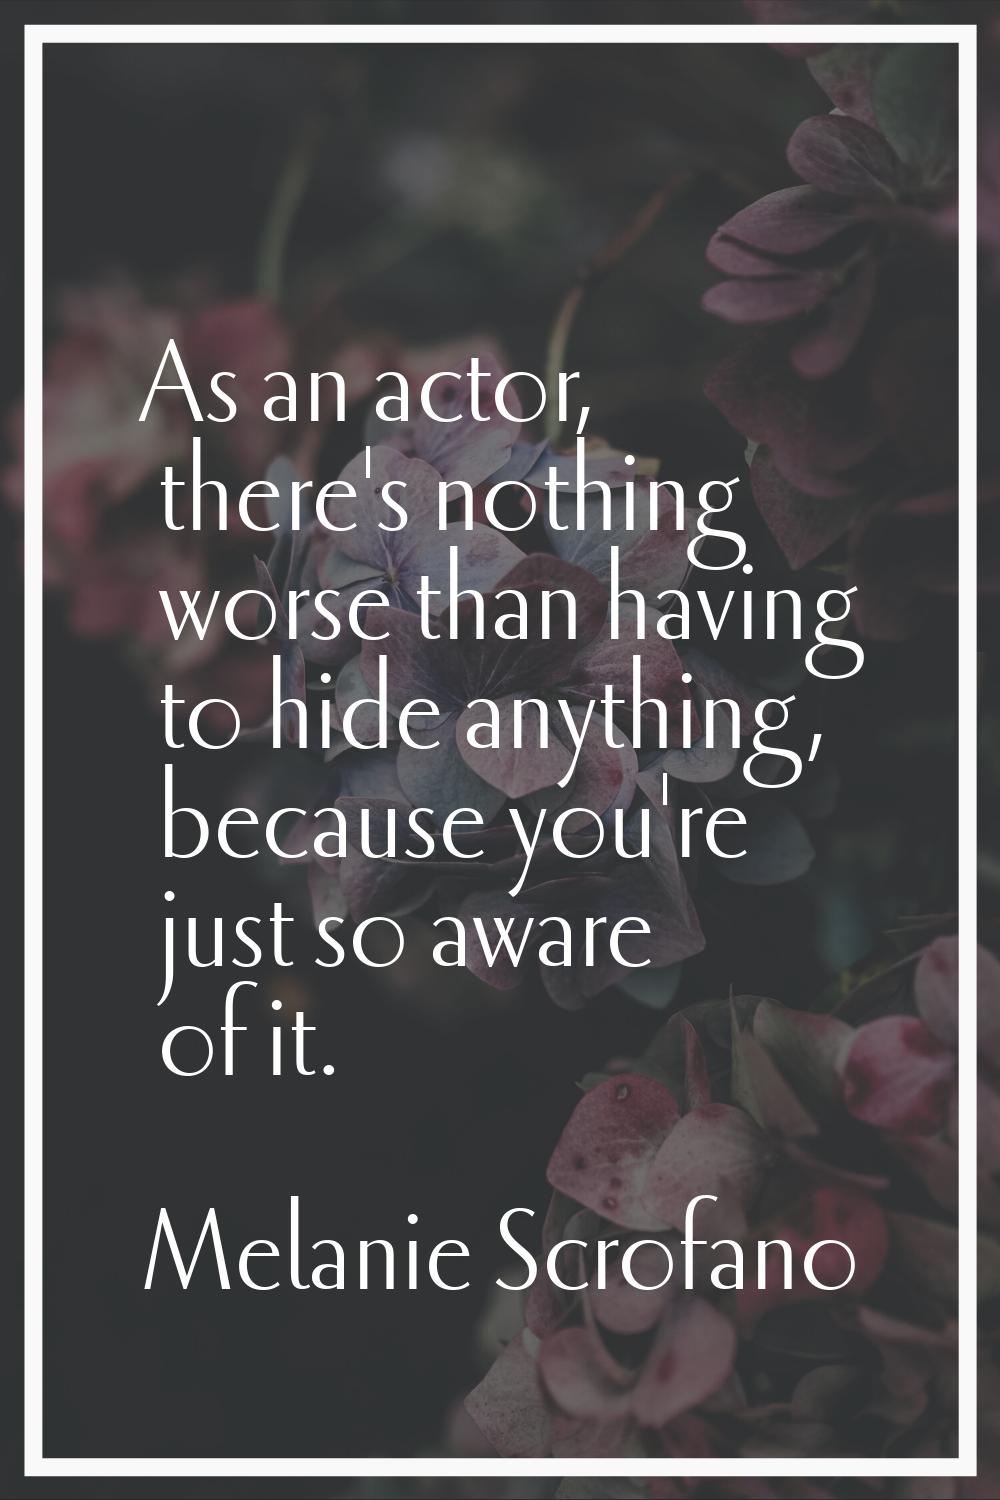 As an actor, there's nothing worse than having to hide anything, because you're just so aware of it